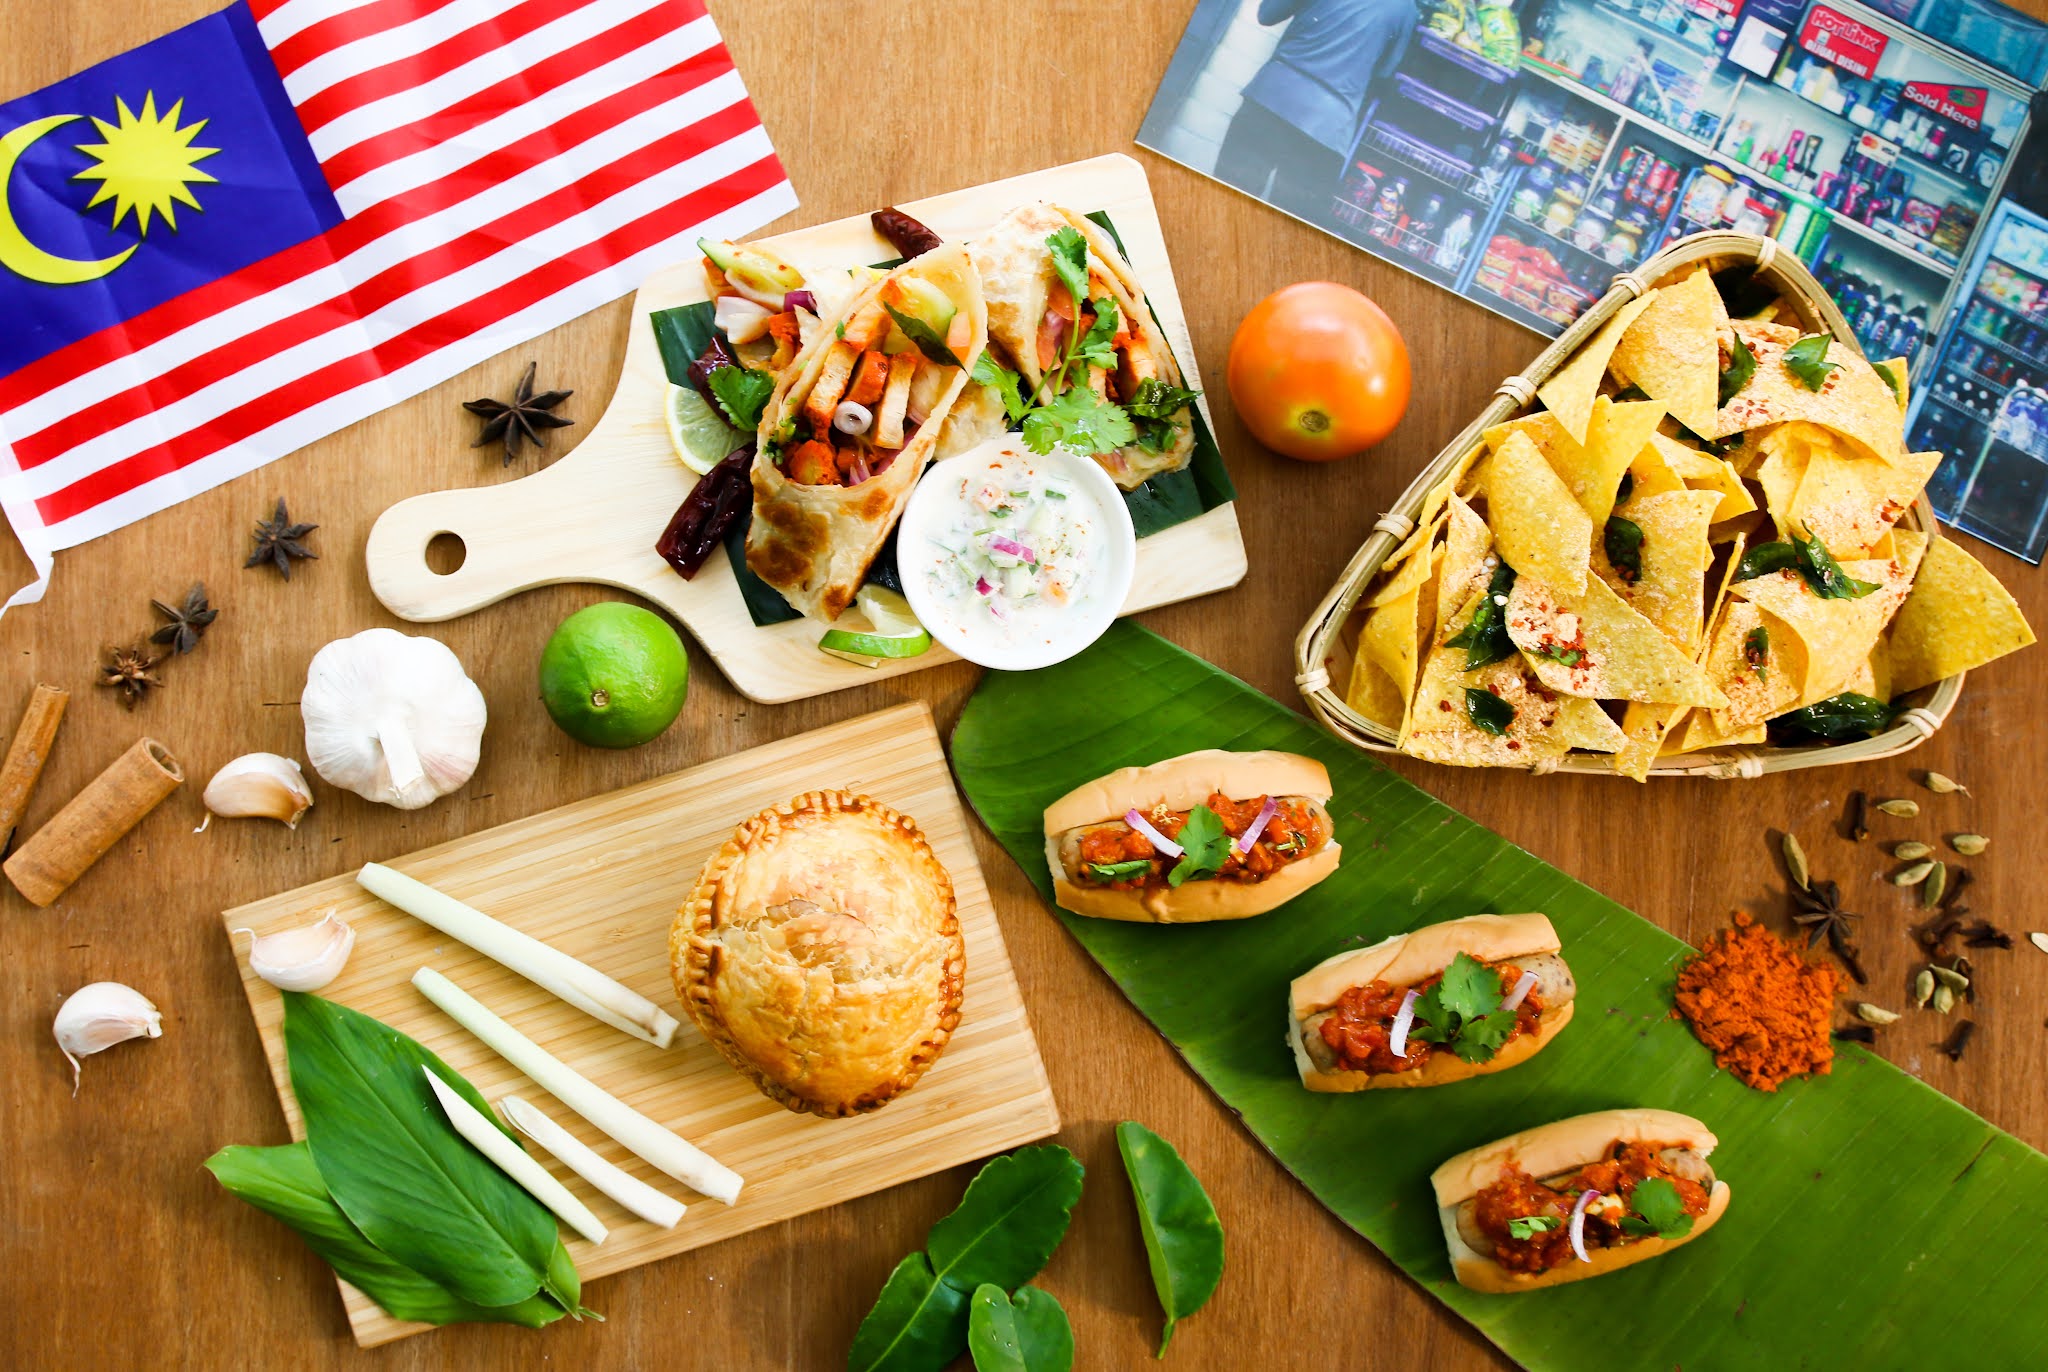 Discover the taste of Malaysia